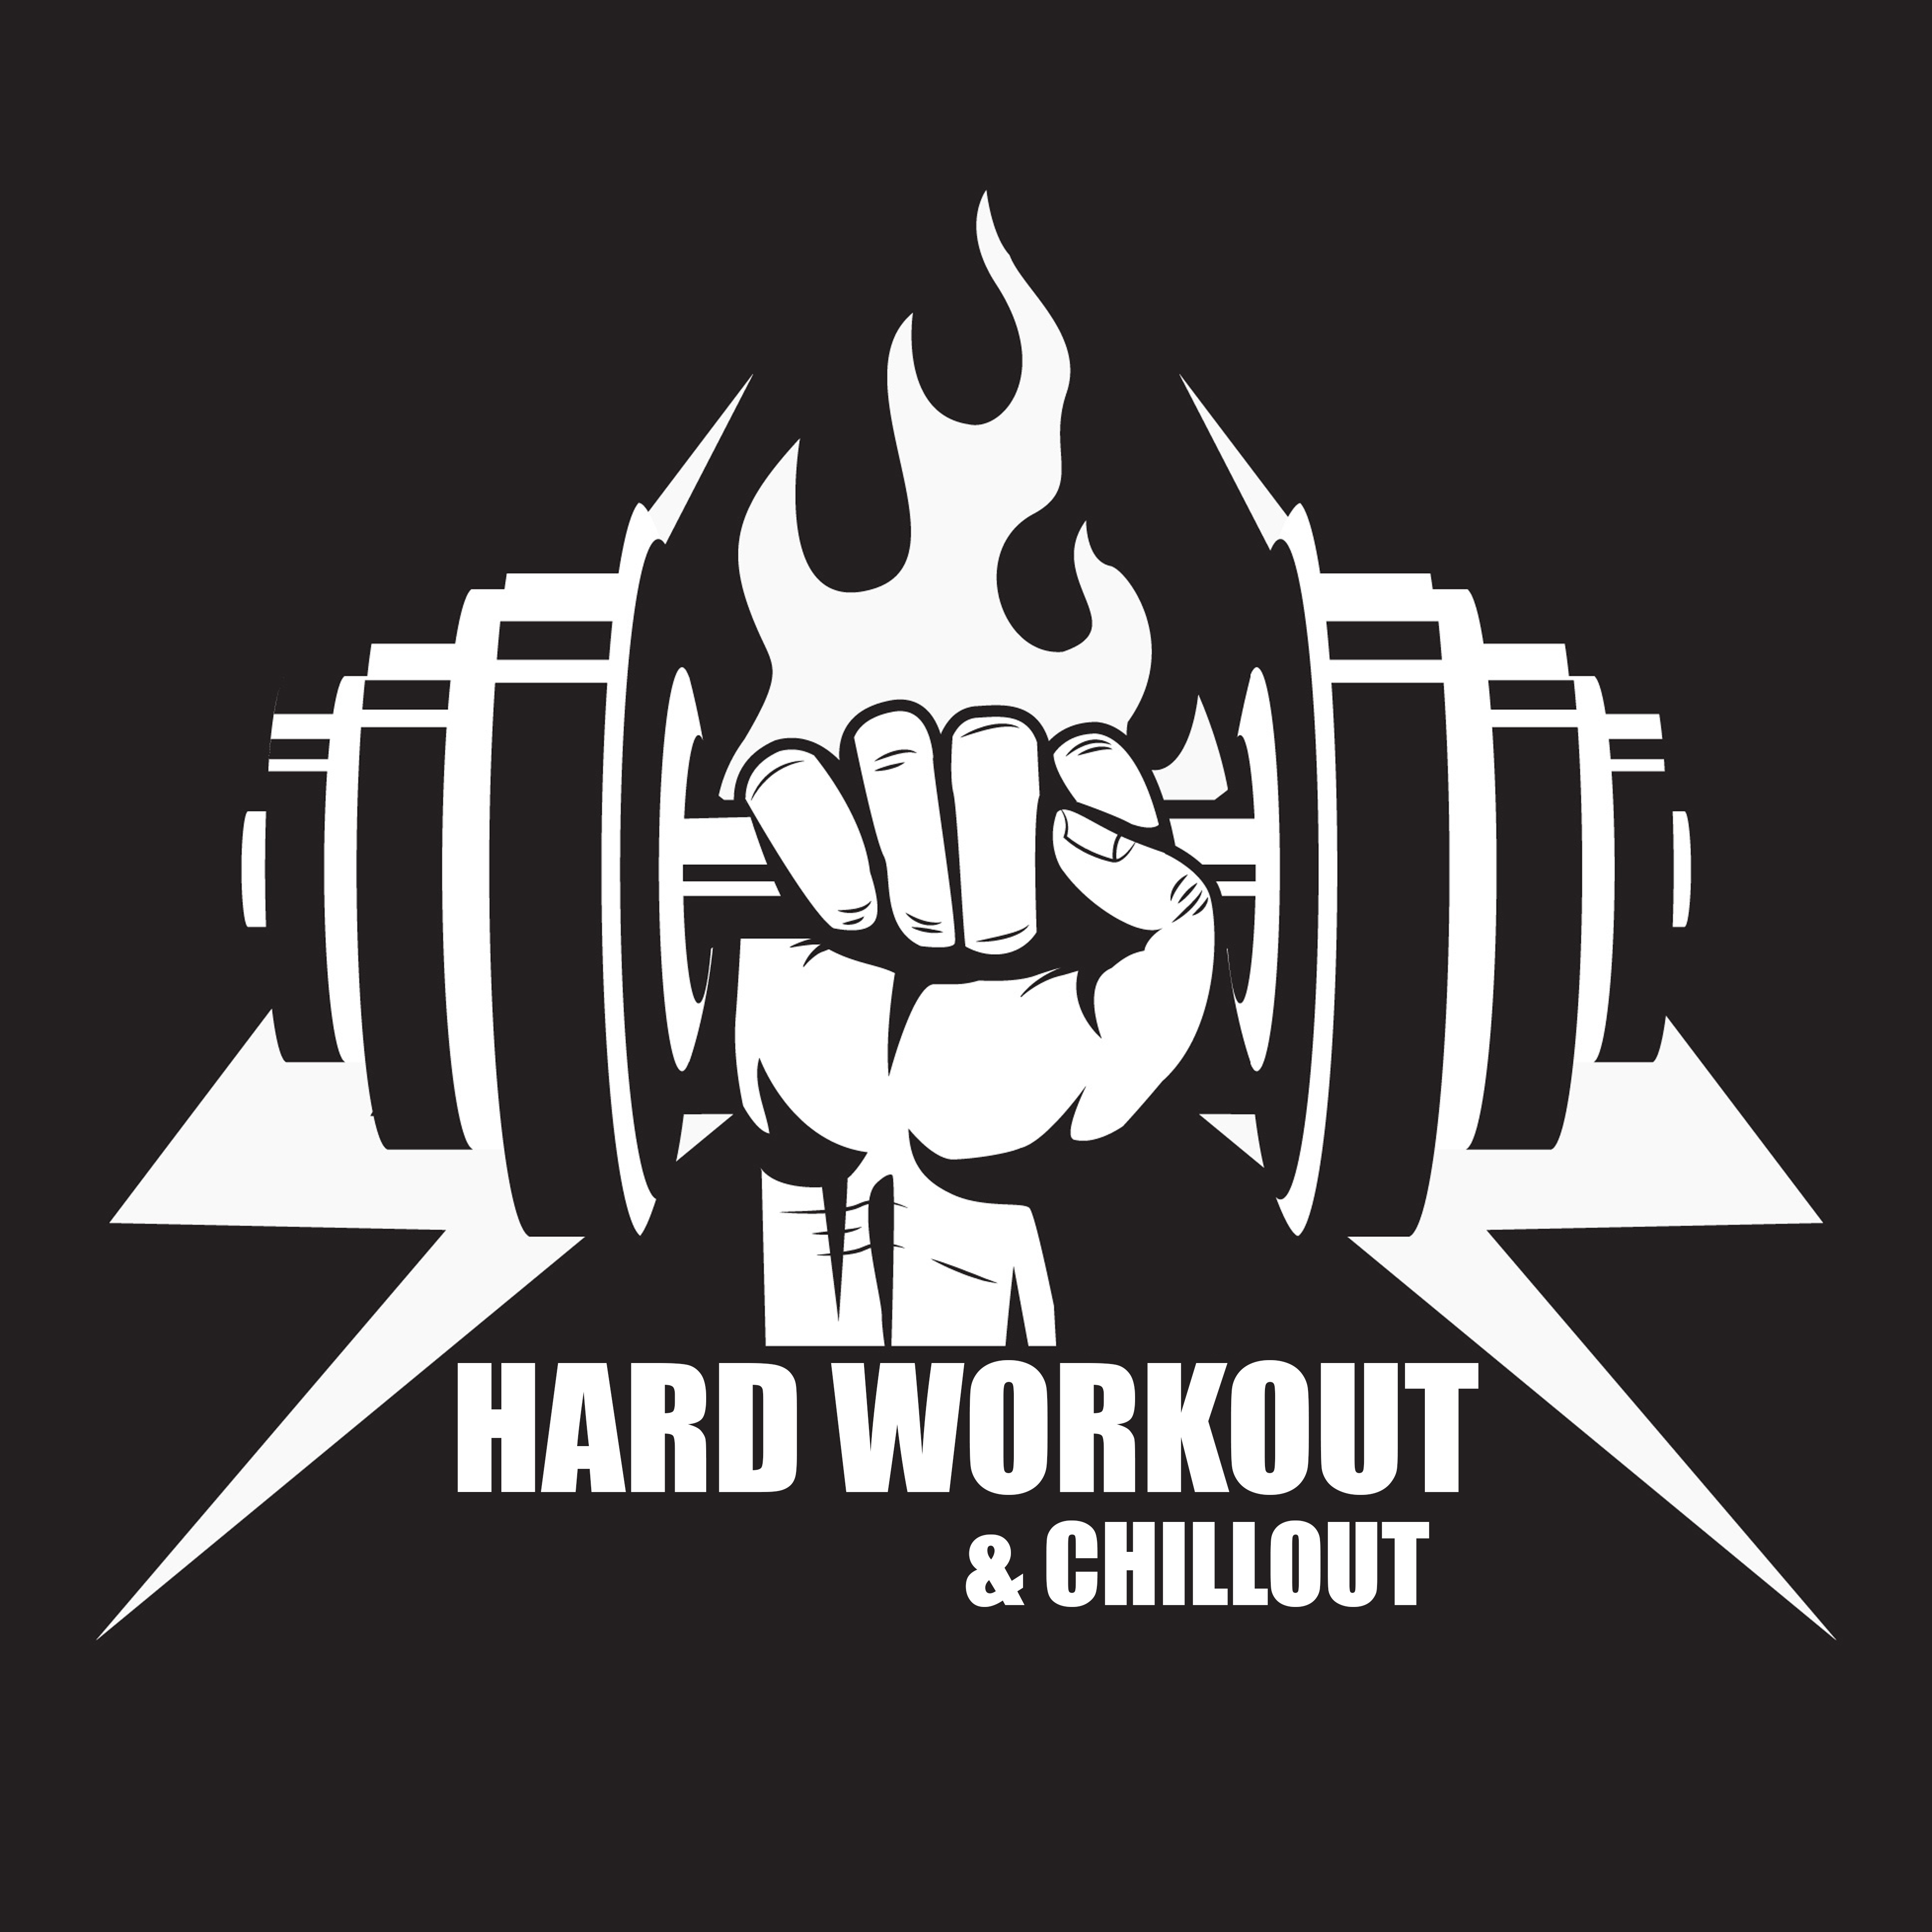 Hard Workout & Chillout